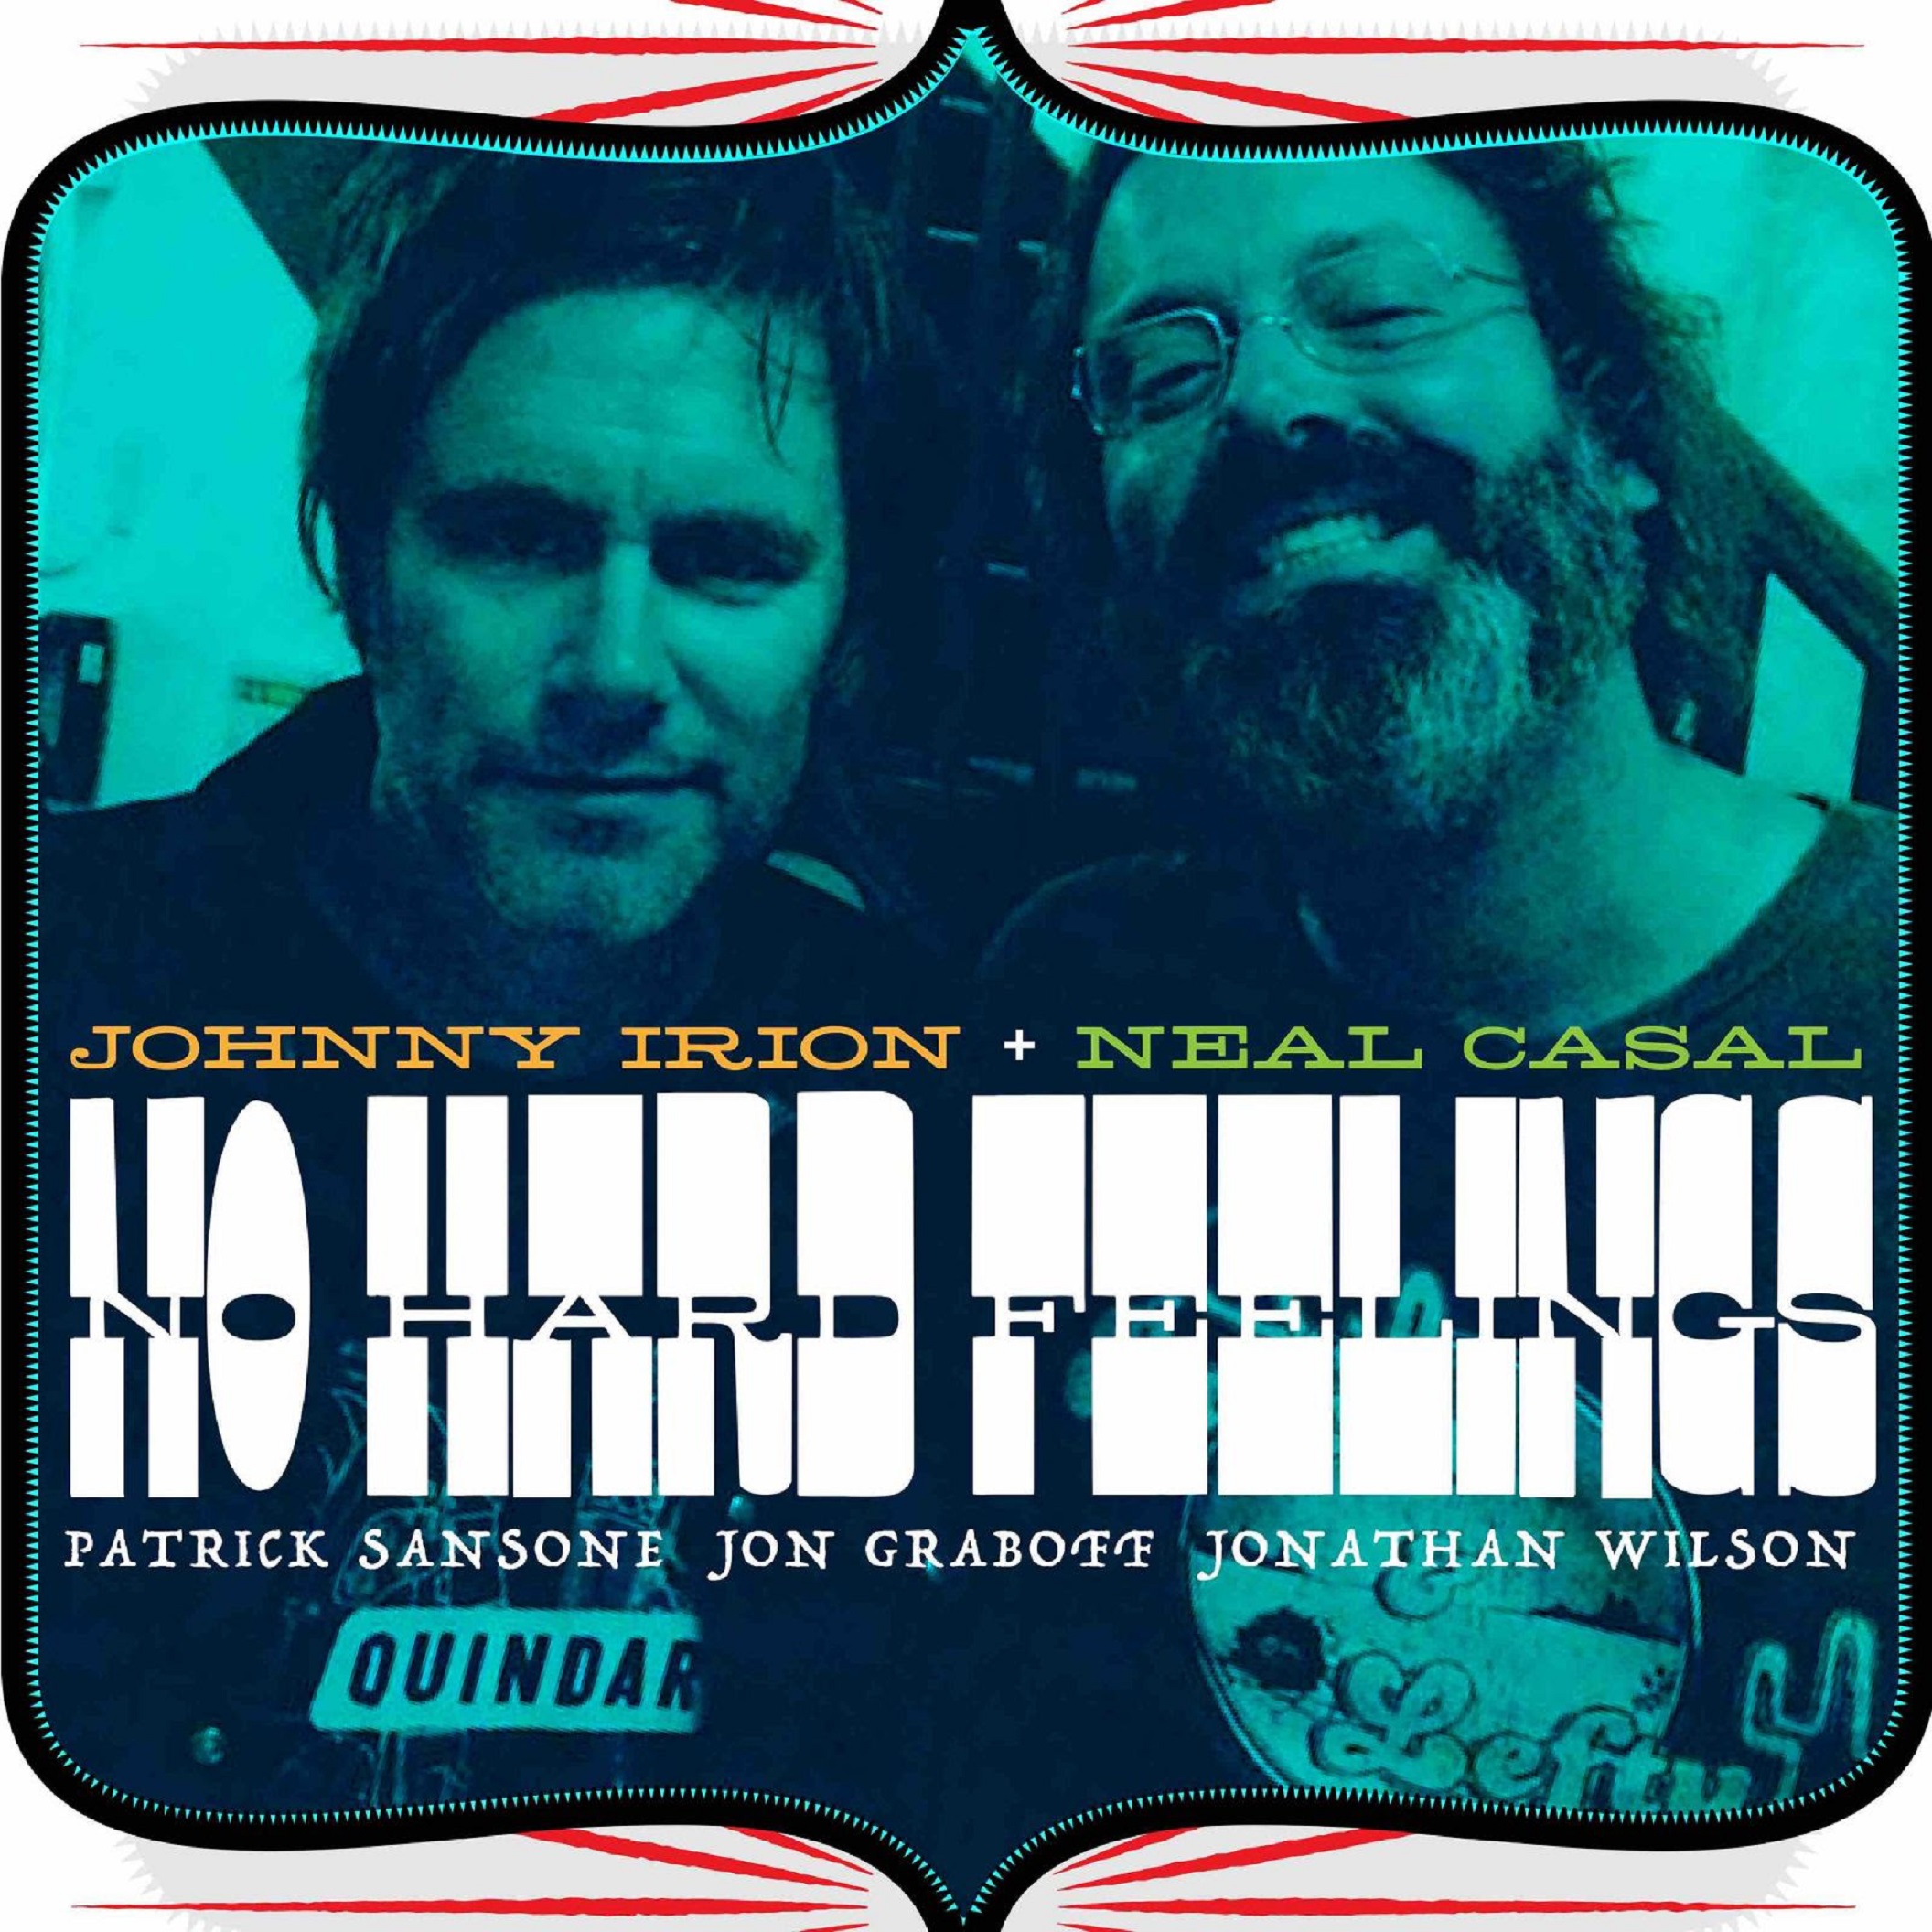 Neal Casal + Johnny Irion - "No Hard Feelings" - Previously Unreleased Recording Out Today